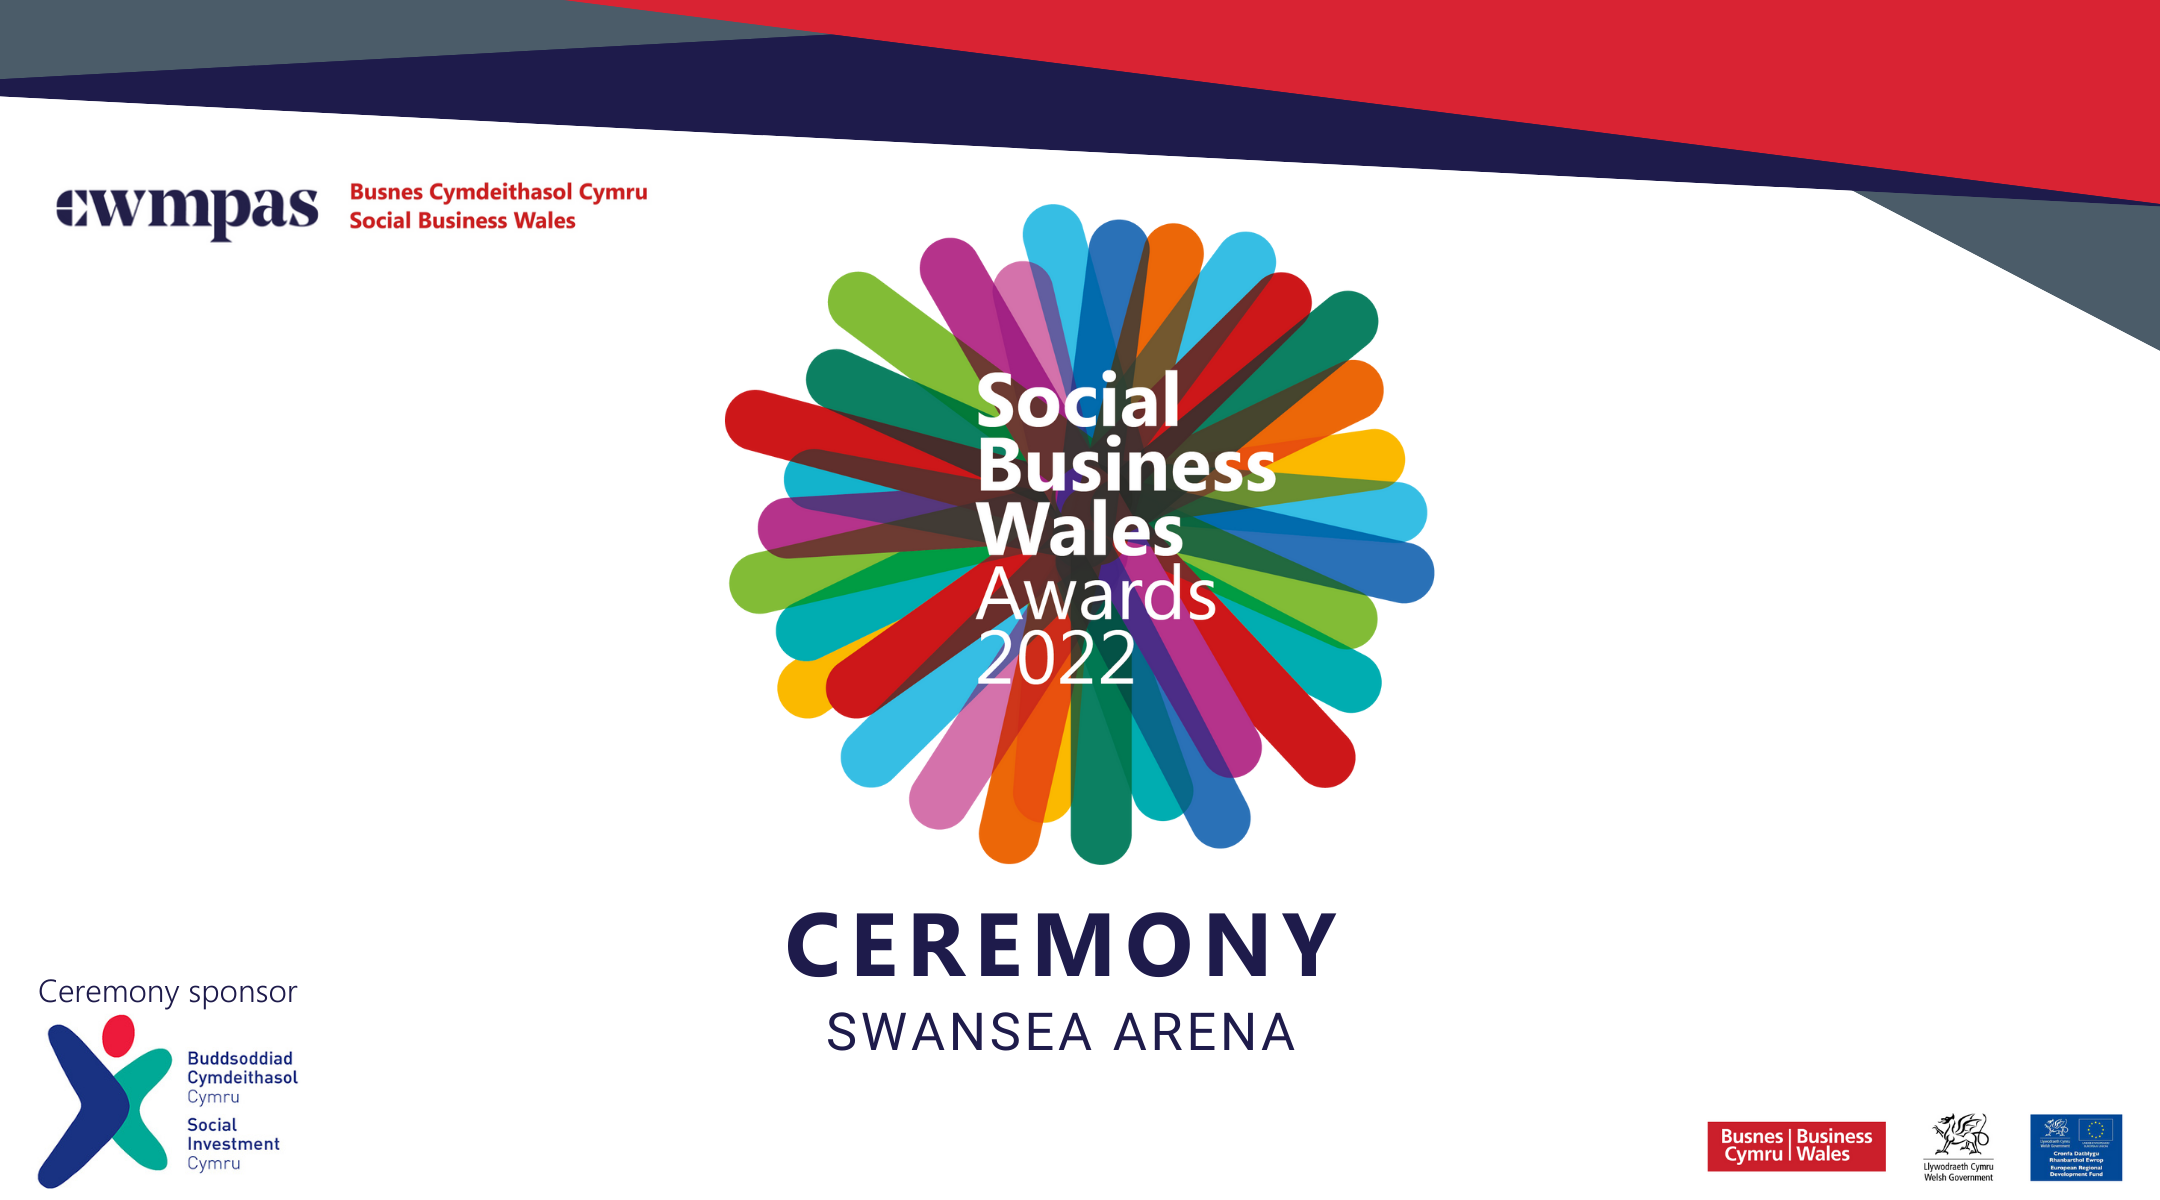 Join the Social Business Wales Awards ceremony 2022 with lunch, entertainment and celebrations!